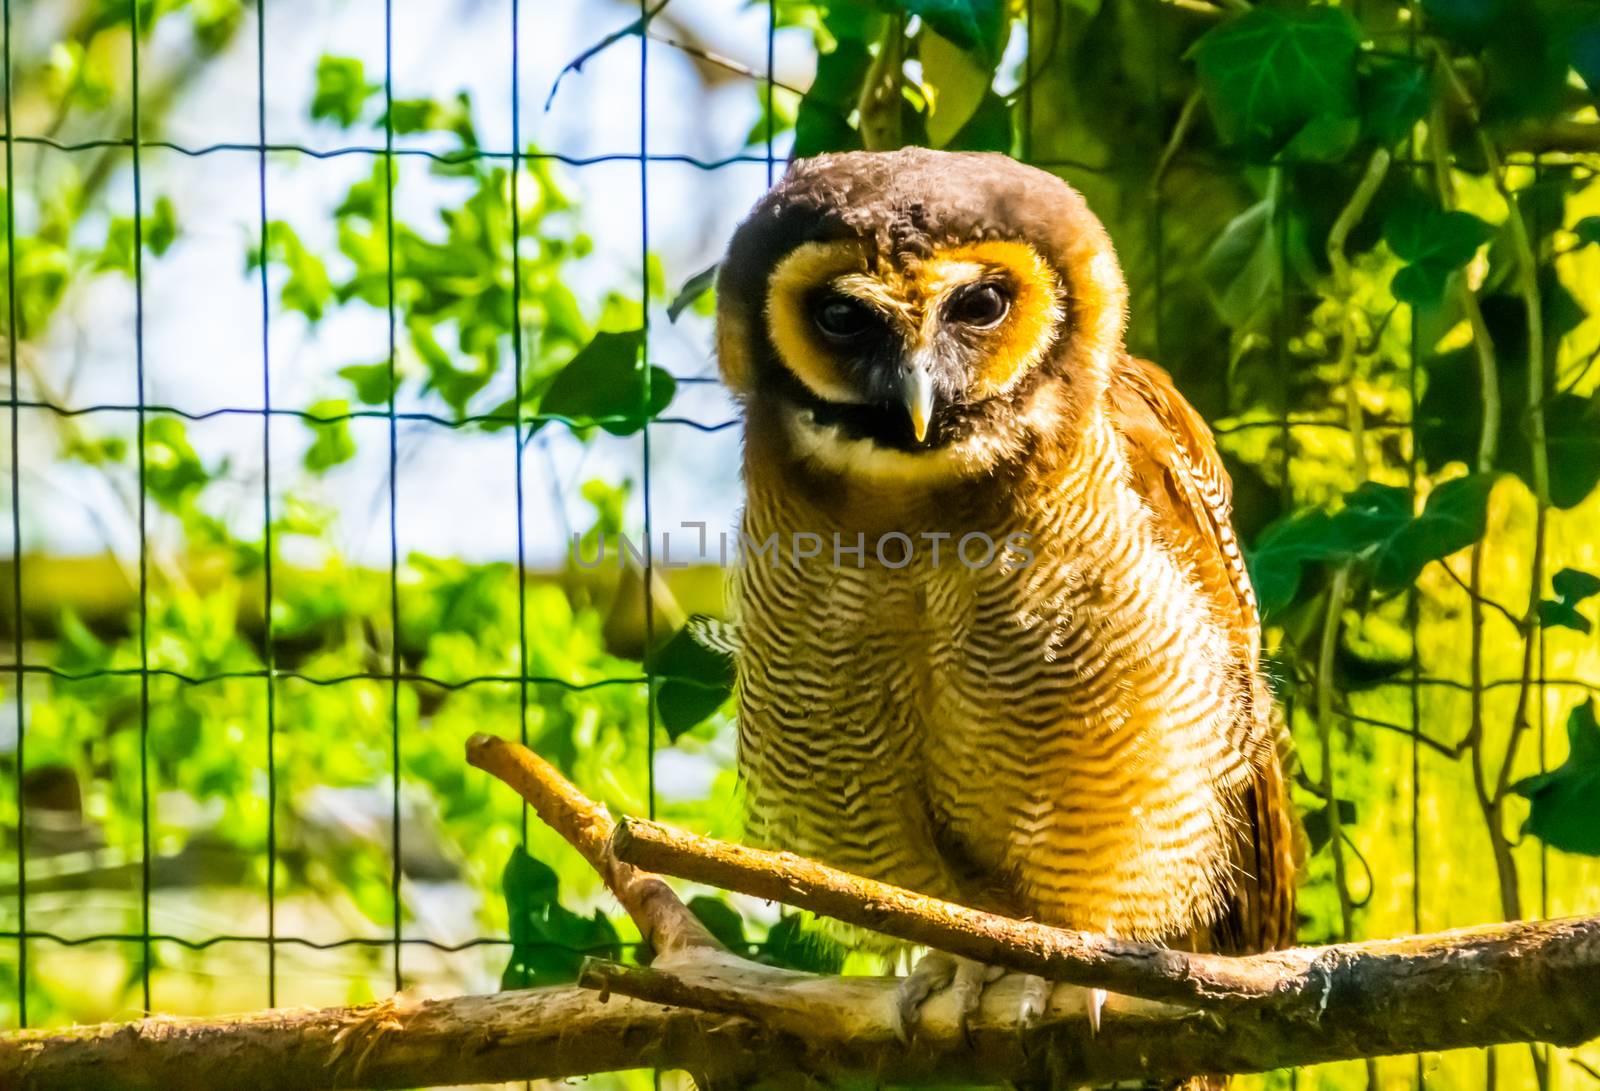 closeup portrait of a brown wood owl sitting on a branch, tropical bird specie form Asia by charlottebleijenberg